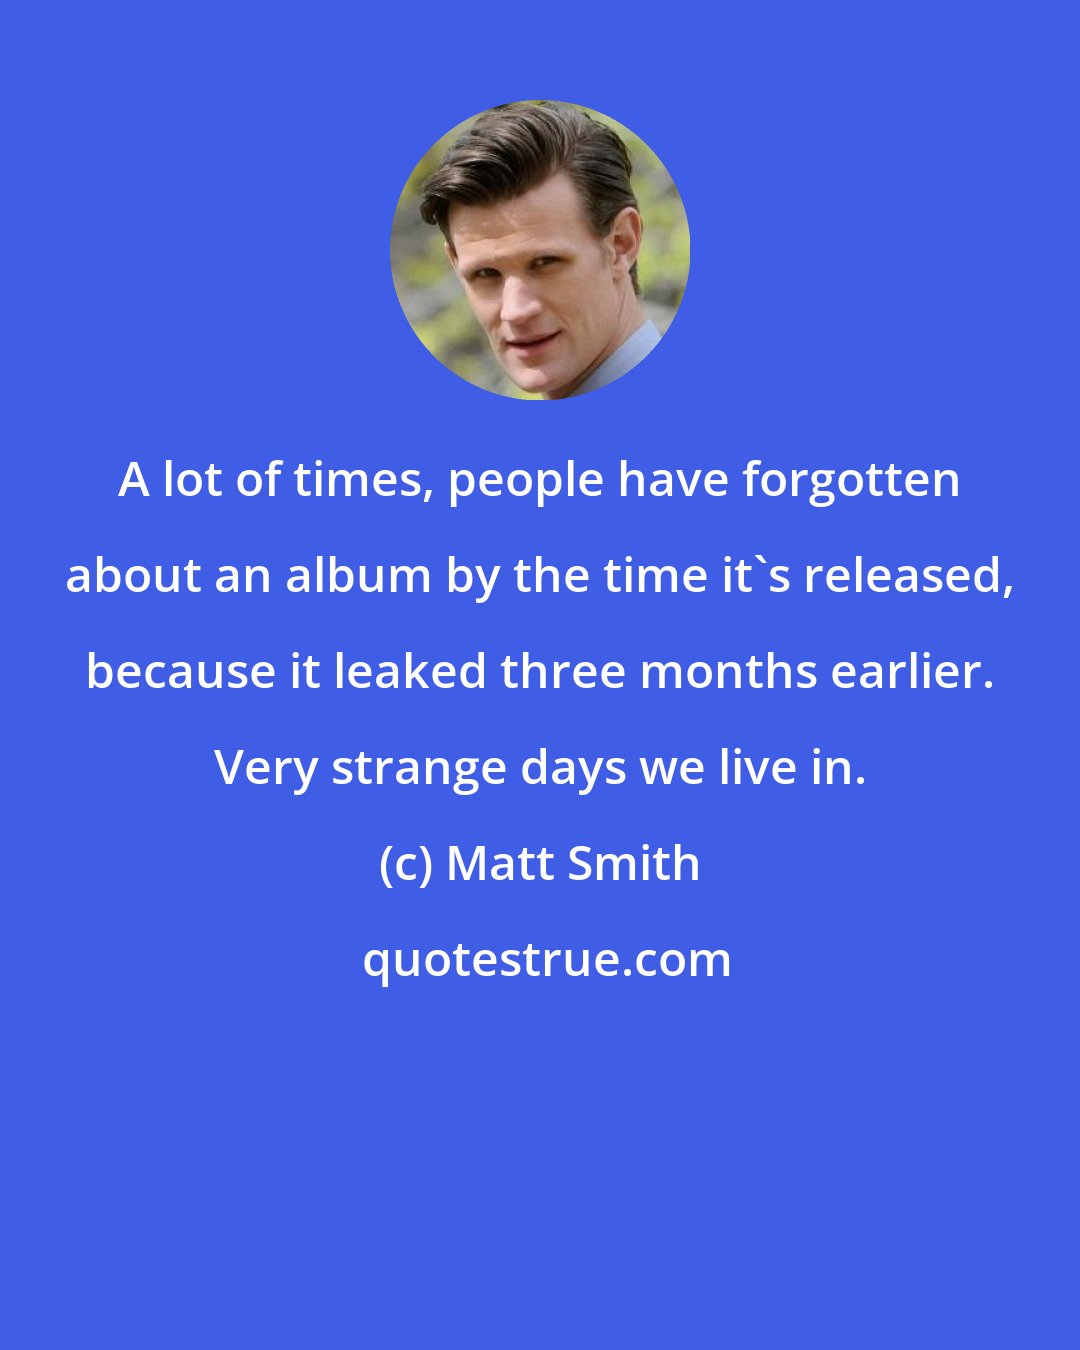 Matt Smith: A lot of times, people have forgotten about an album by the time it's released, because it leaked three months earlier. Very strange days we live in.